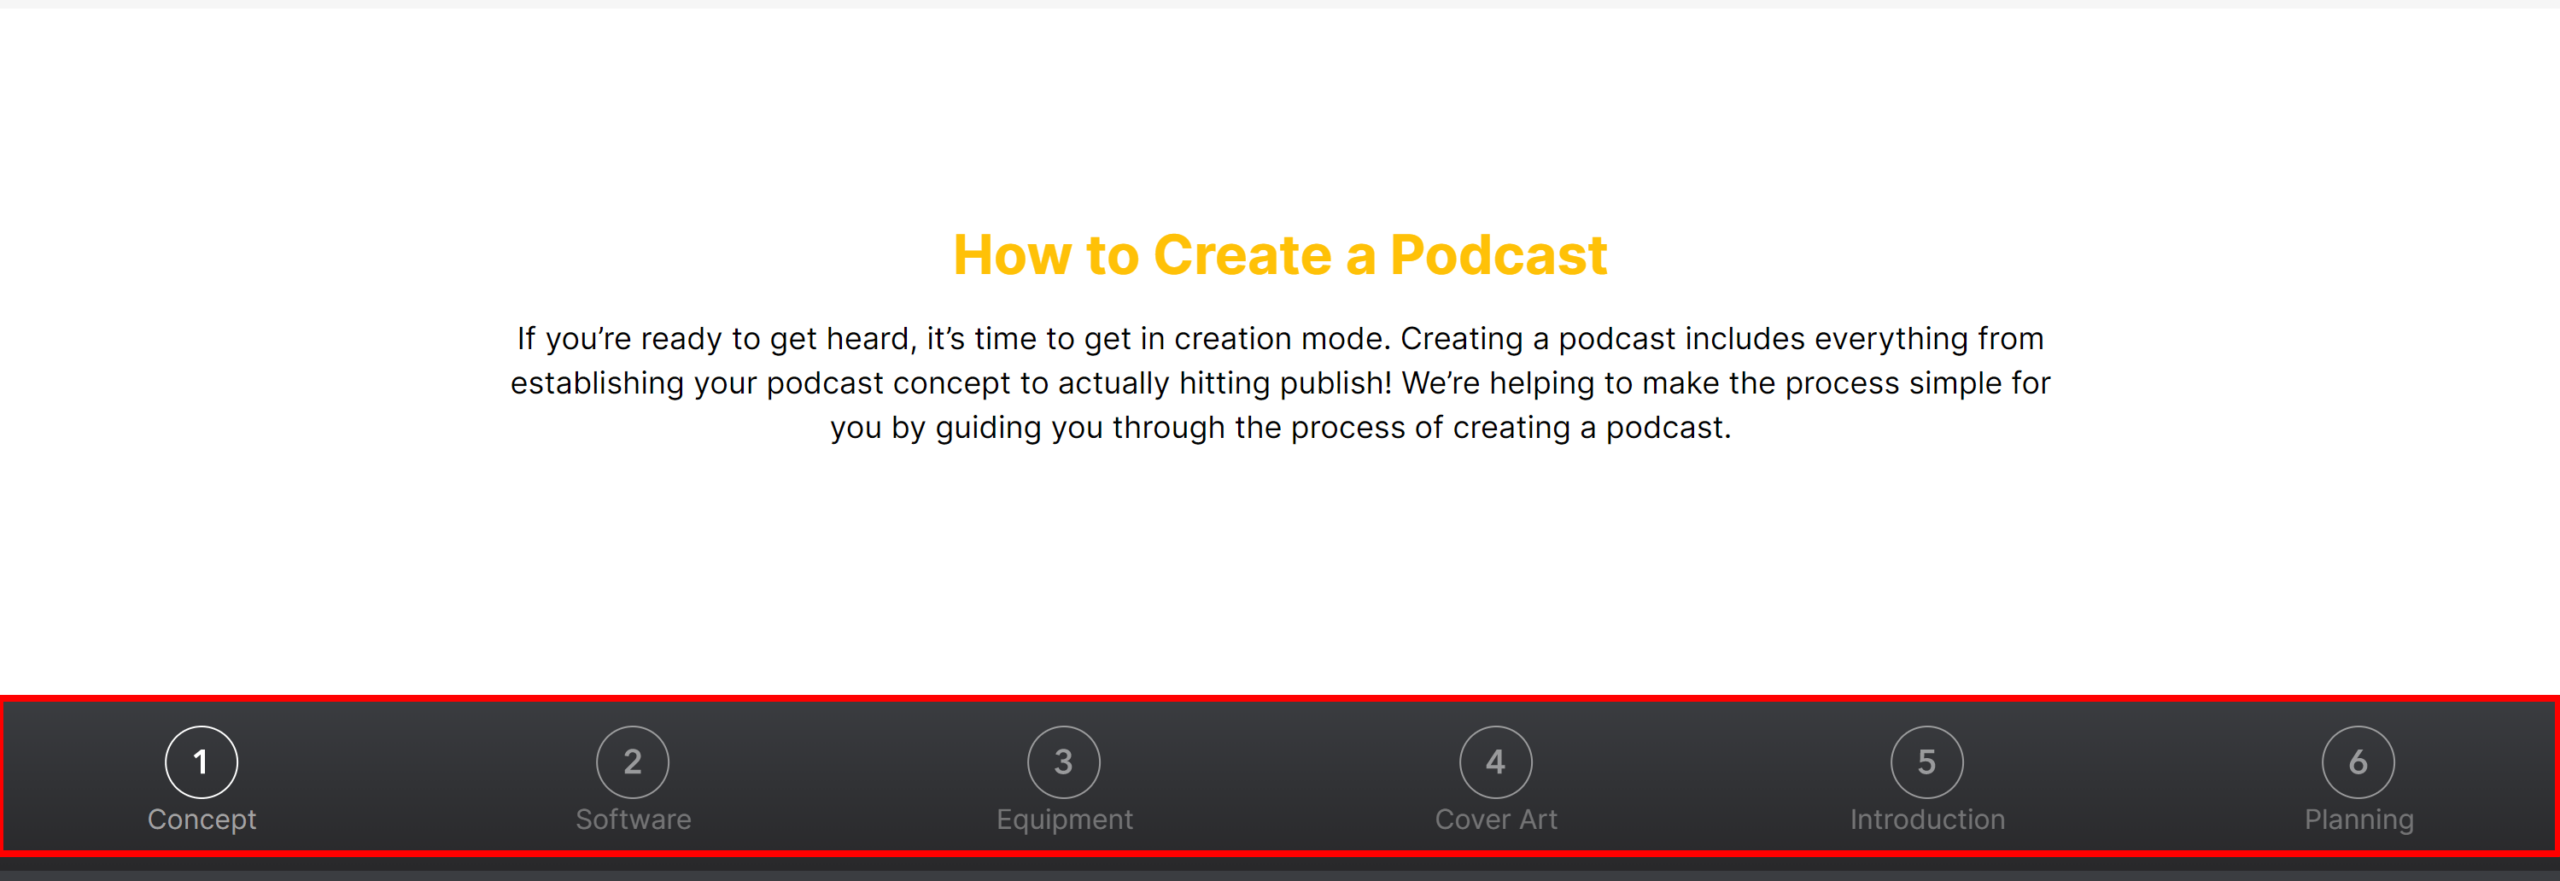 how to create podcast- spreaker reviews